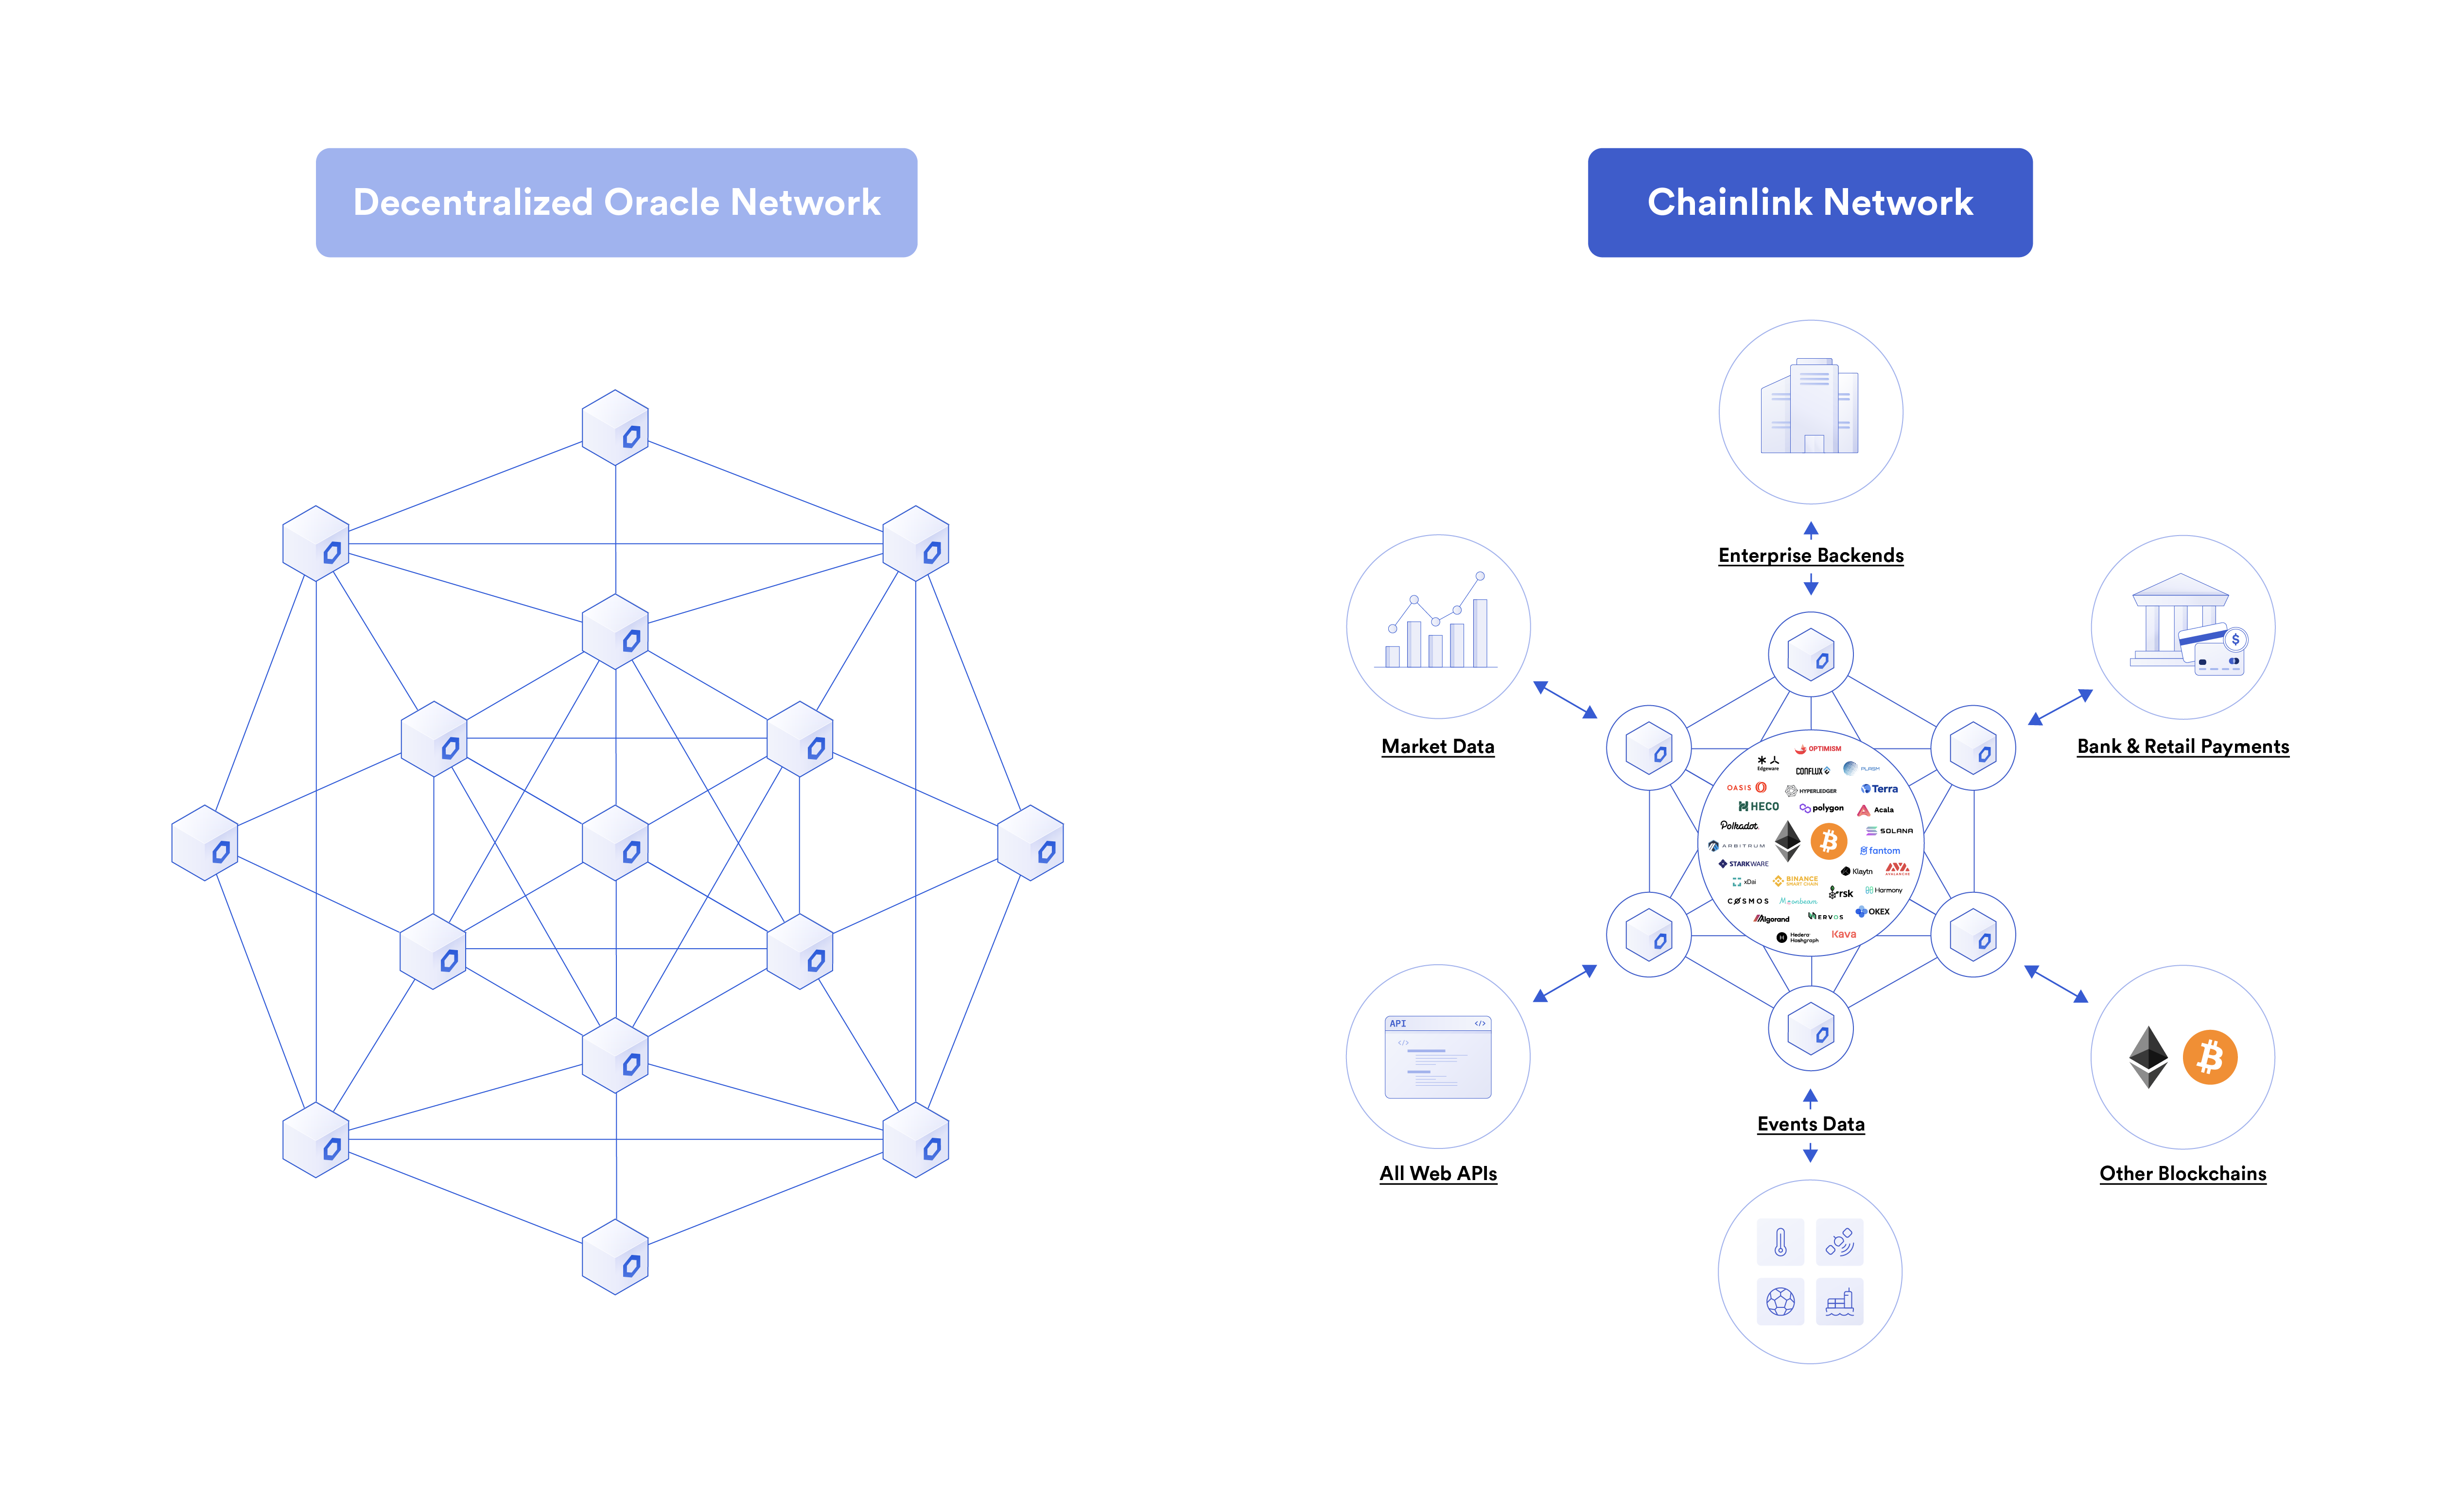 Chainlink decentralized oracle networks connect smart contracts to the real world